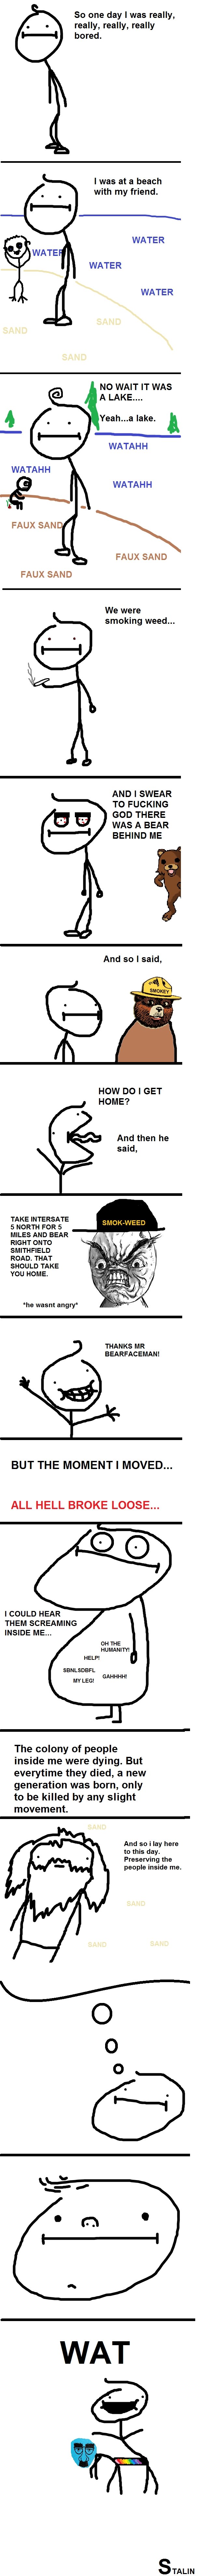 Epic Weed